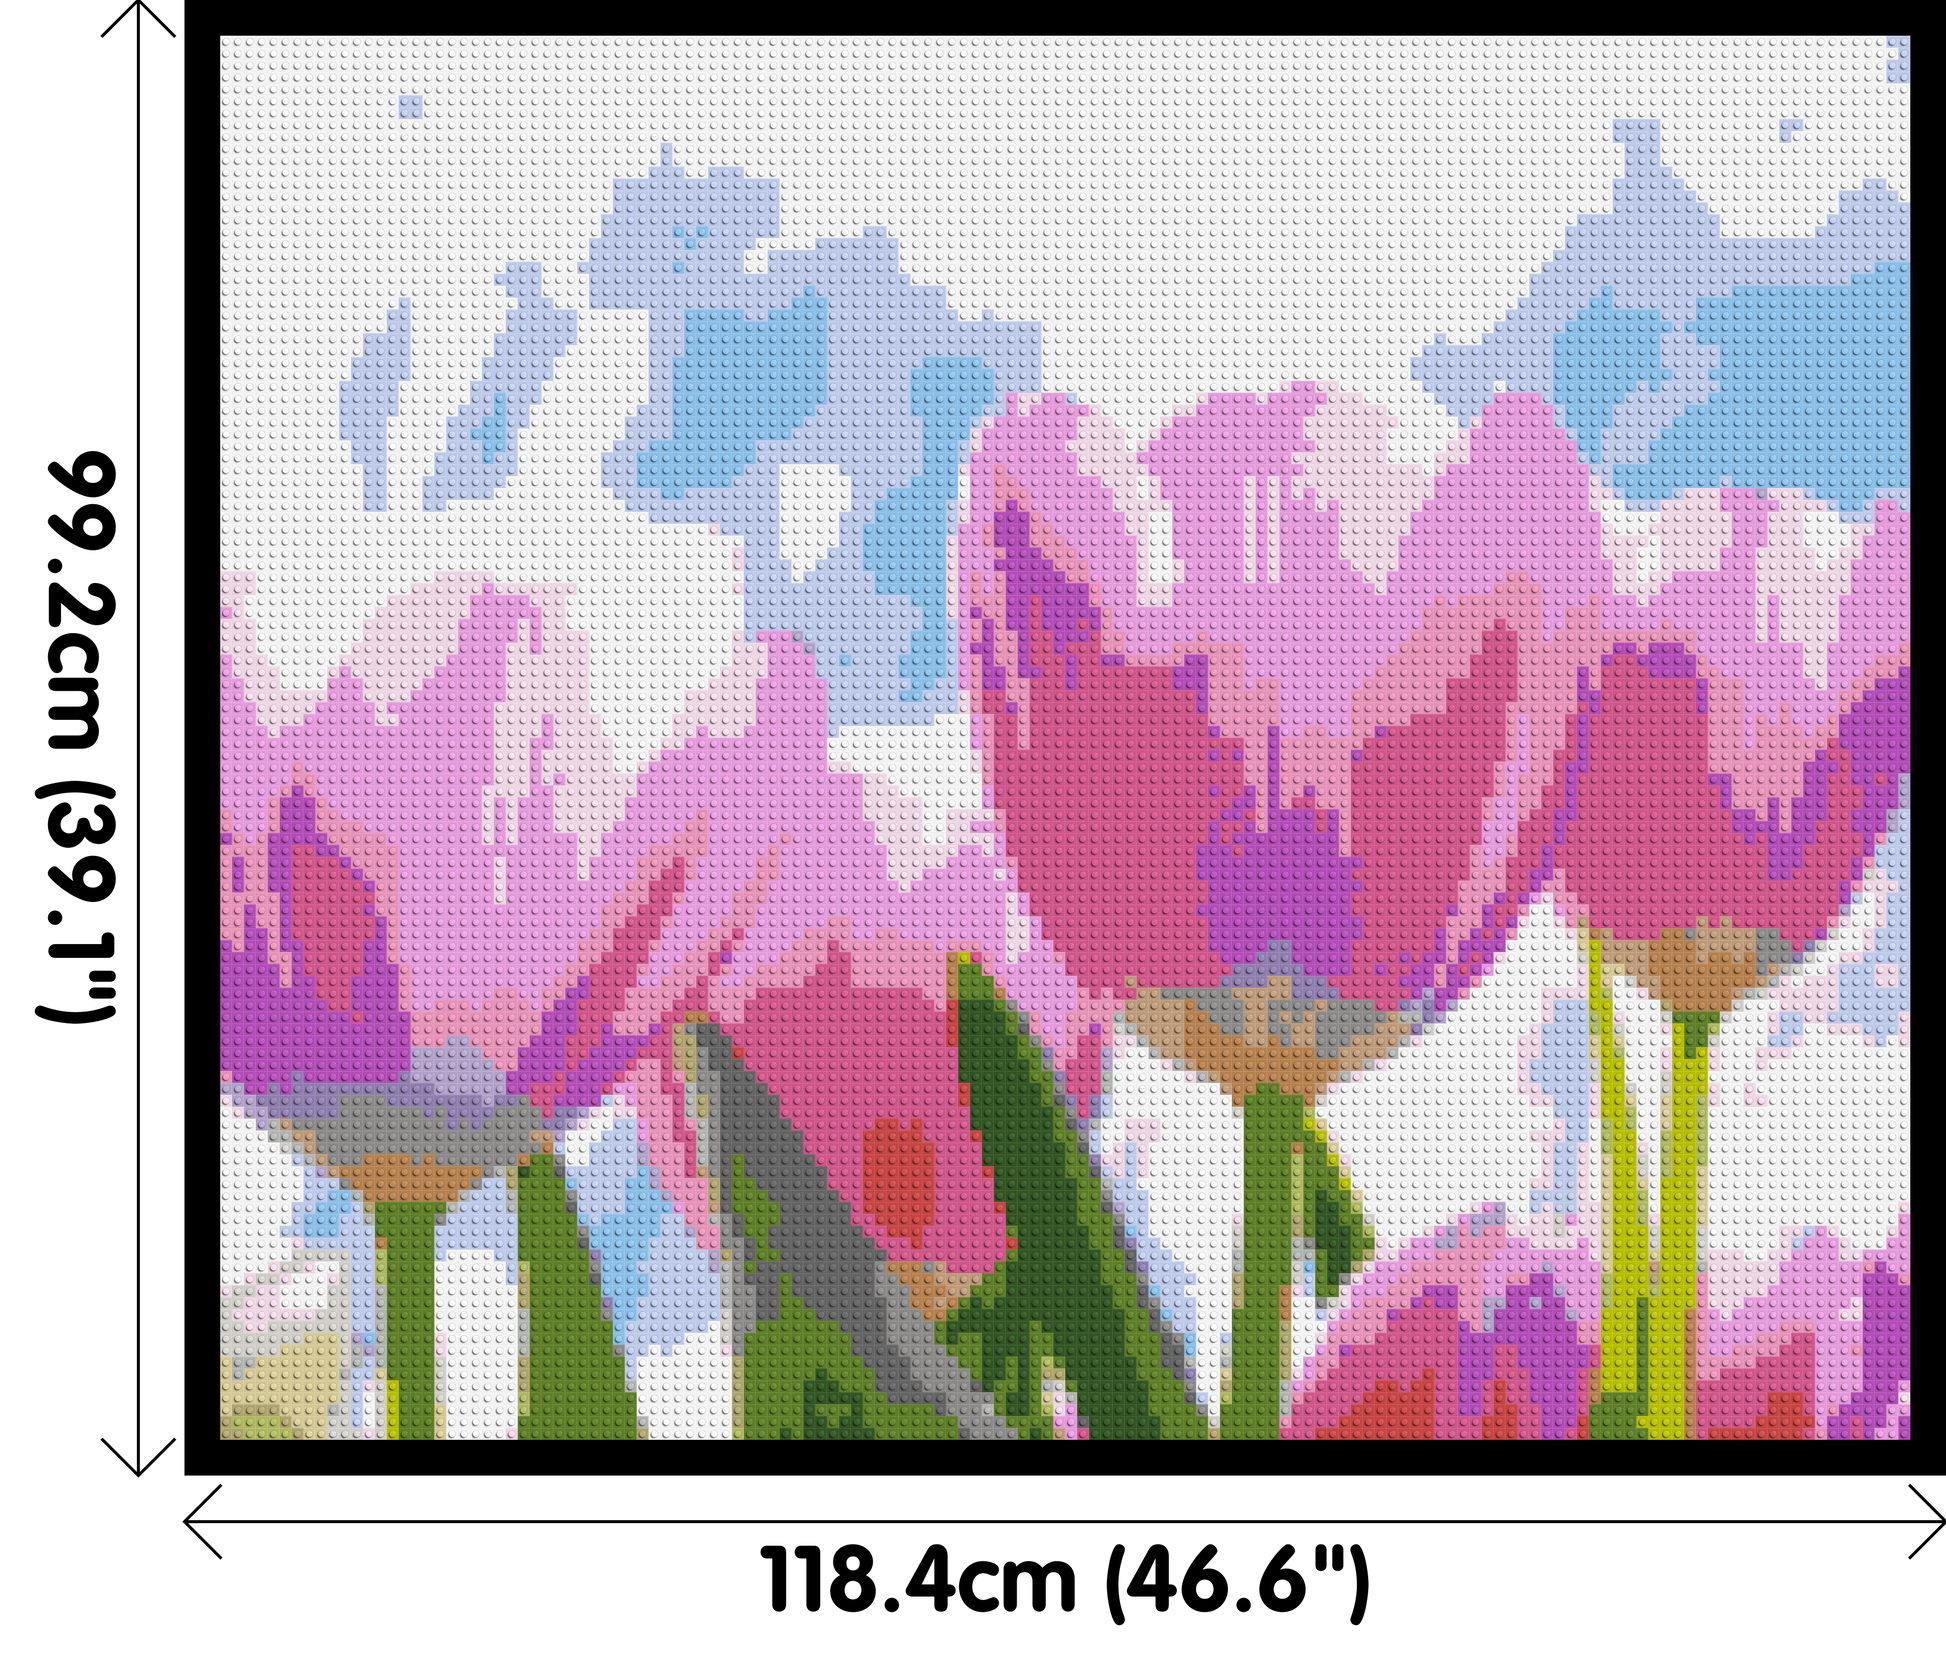 Pink Tulips - Brick Art Mosaic Kit 6x5 dimensions with frame